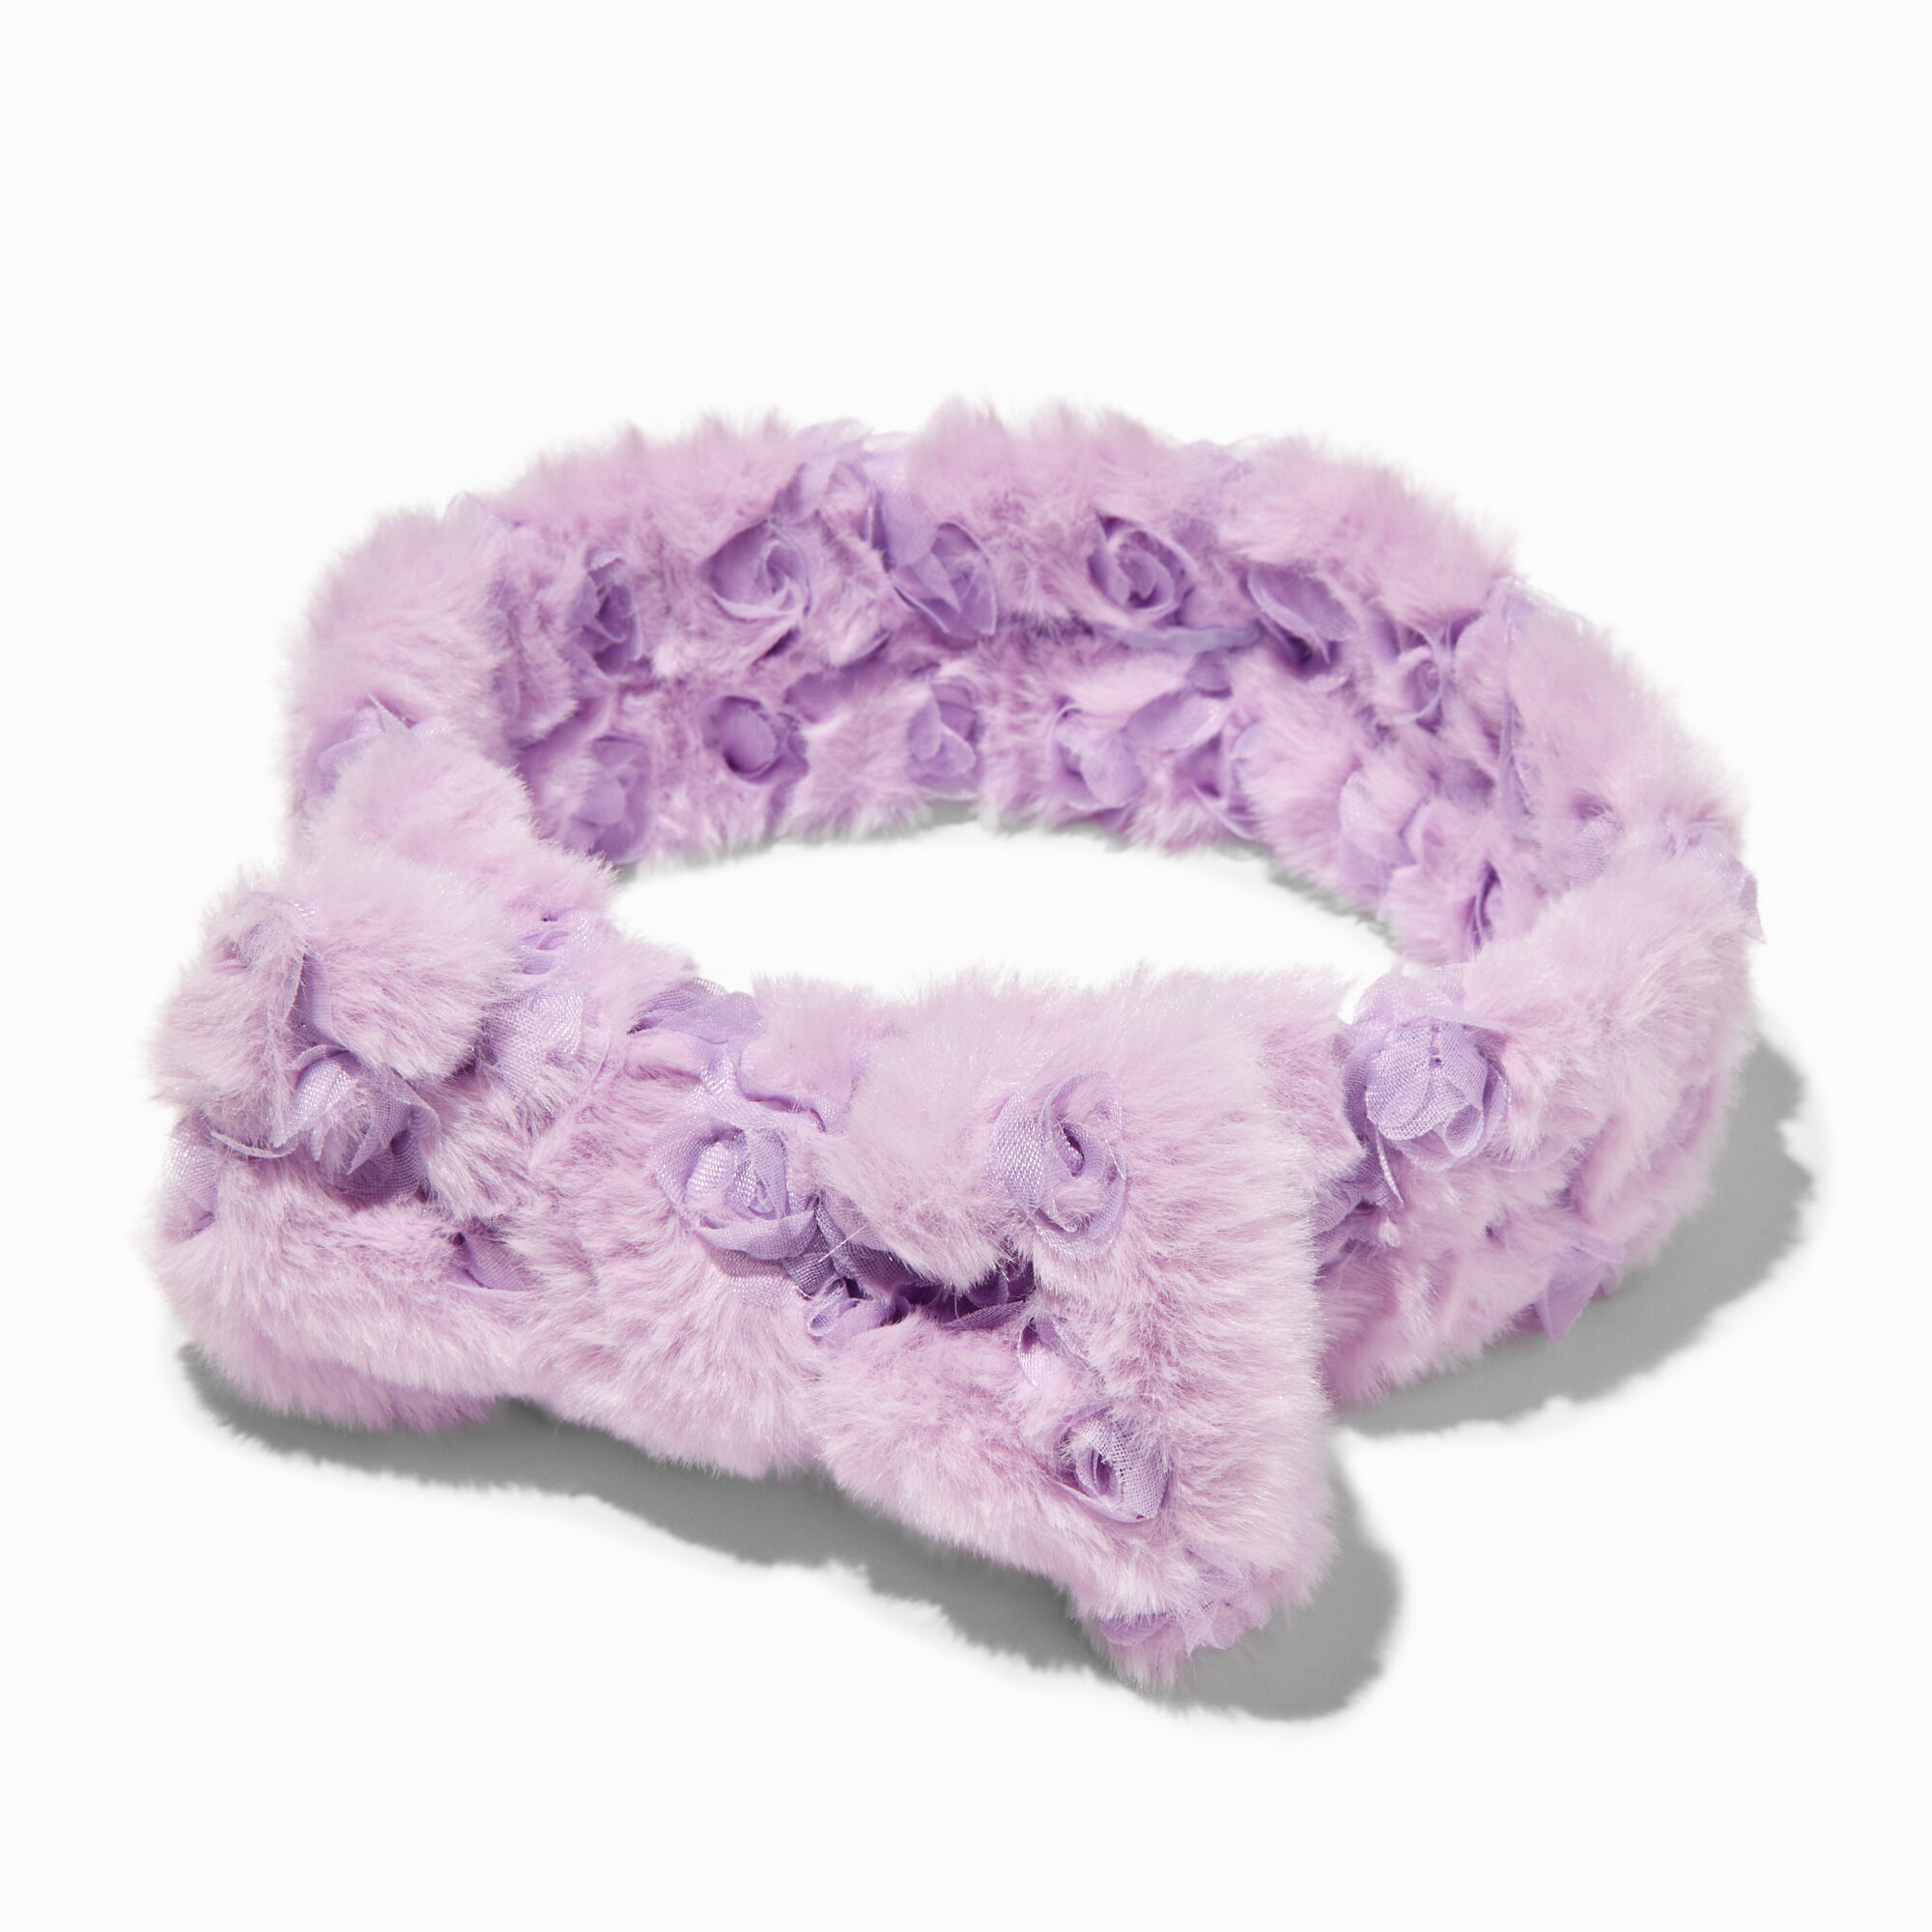 View Claires Rose Furry Makeup Bow Headwrap Lilac information